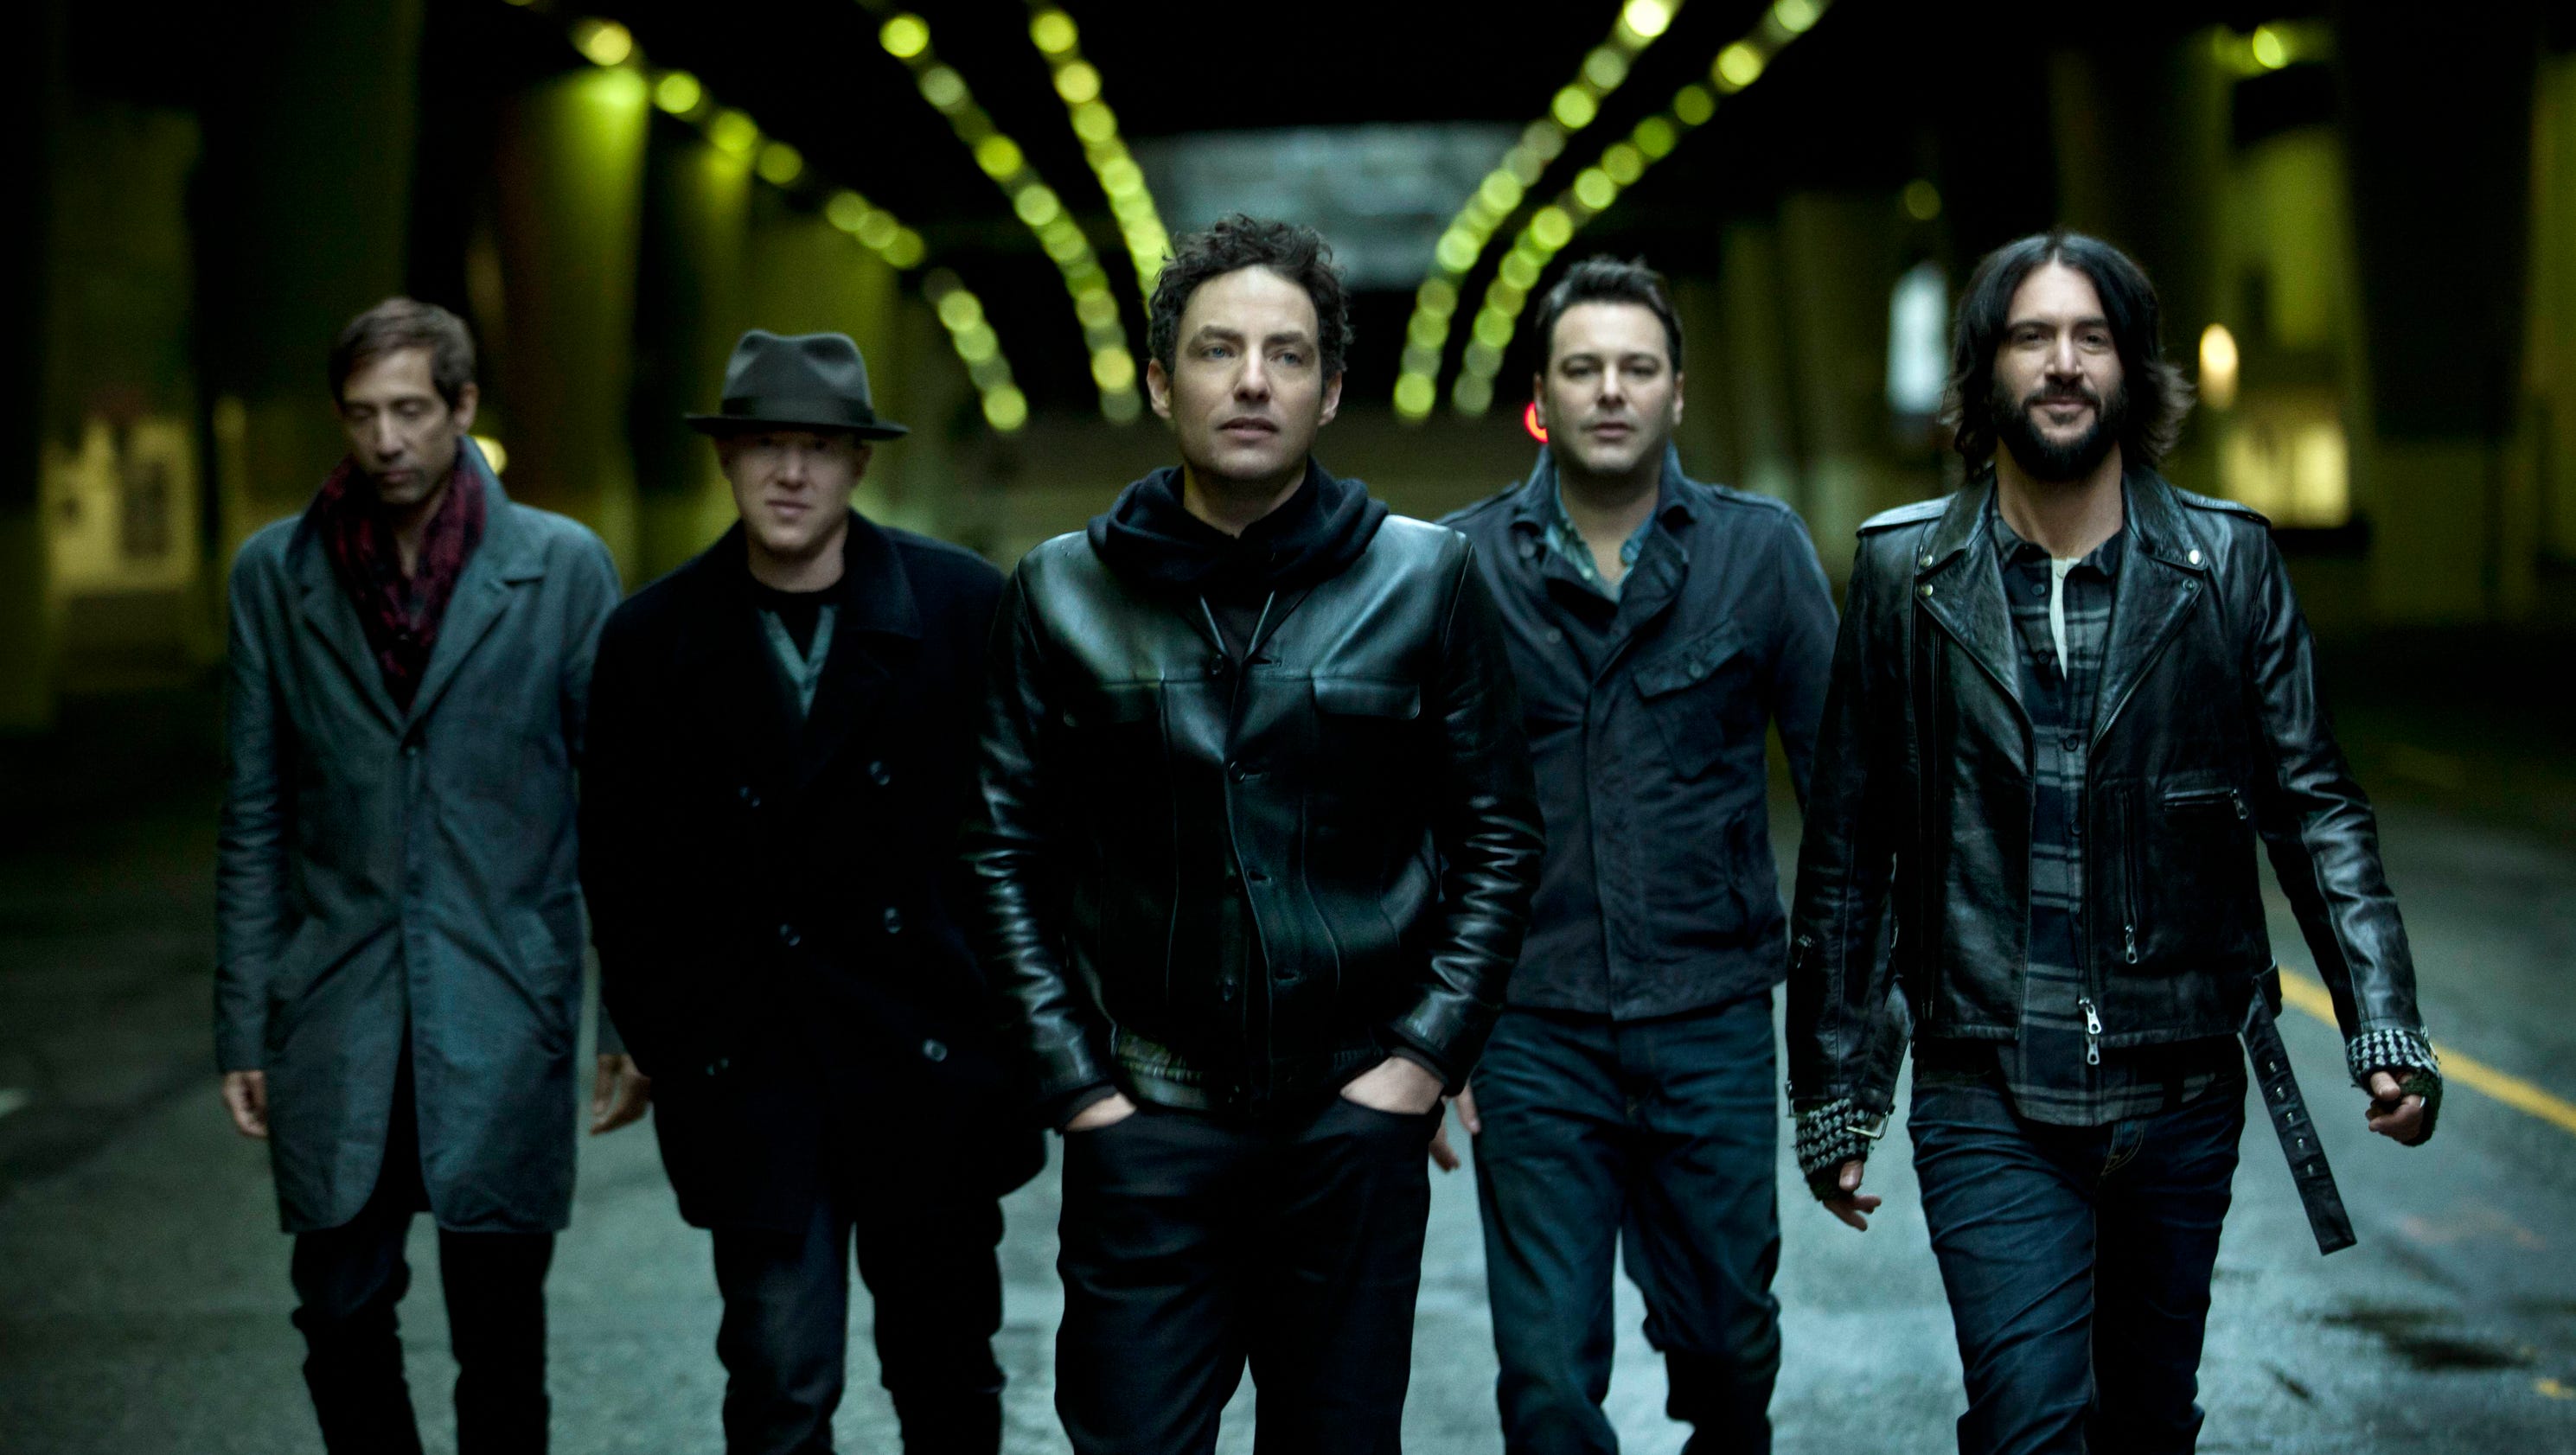 Jakob Dylan brings The Wallflowers to Woodstock Friday